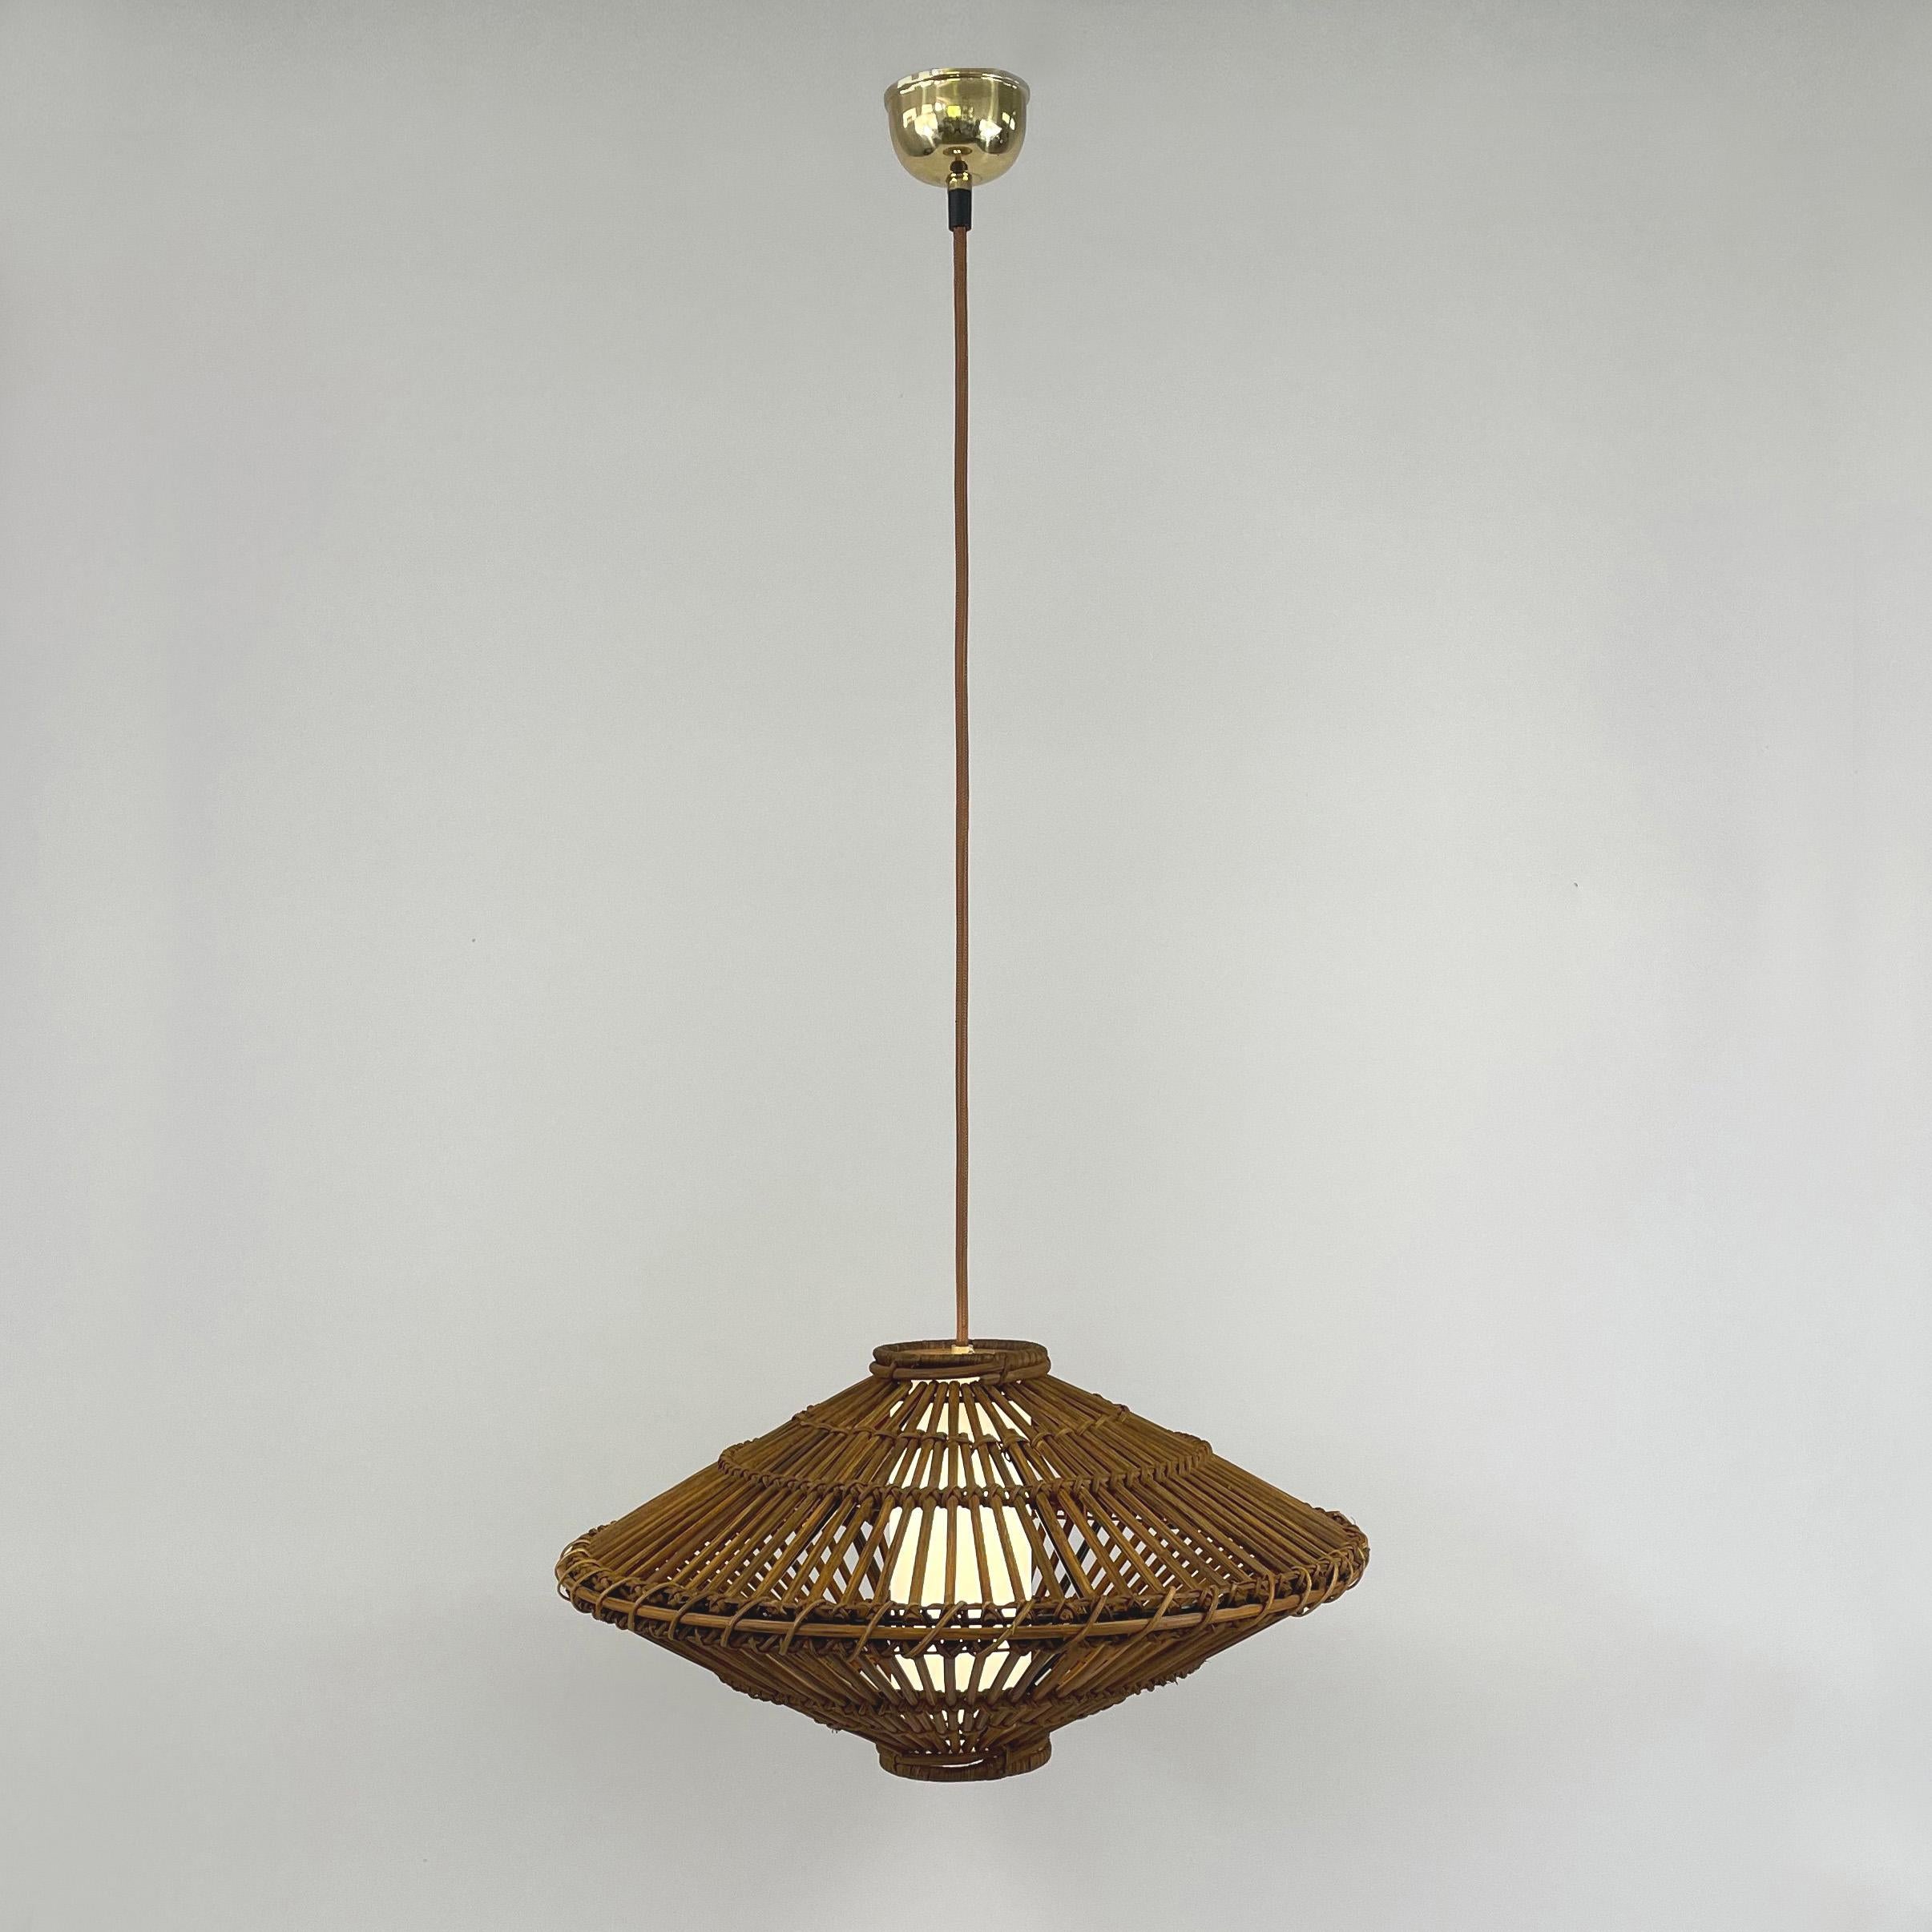 This beautiful handcrafted Louis Sognot style pendant was designed and manufactured in France in the 1960s. It features a large rattan lampshade, light brown silk cord and an off-white linen covered diffuser. Brass canopy.

The light has been